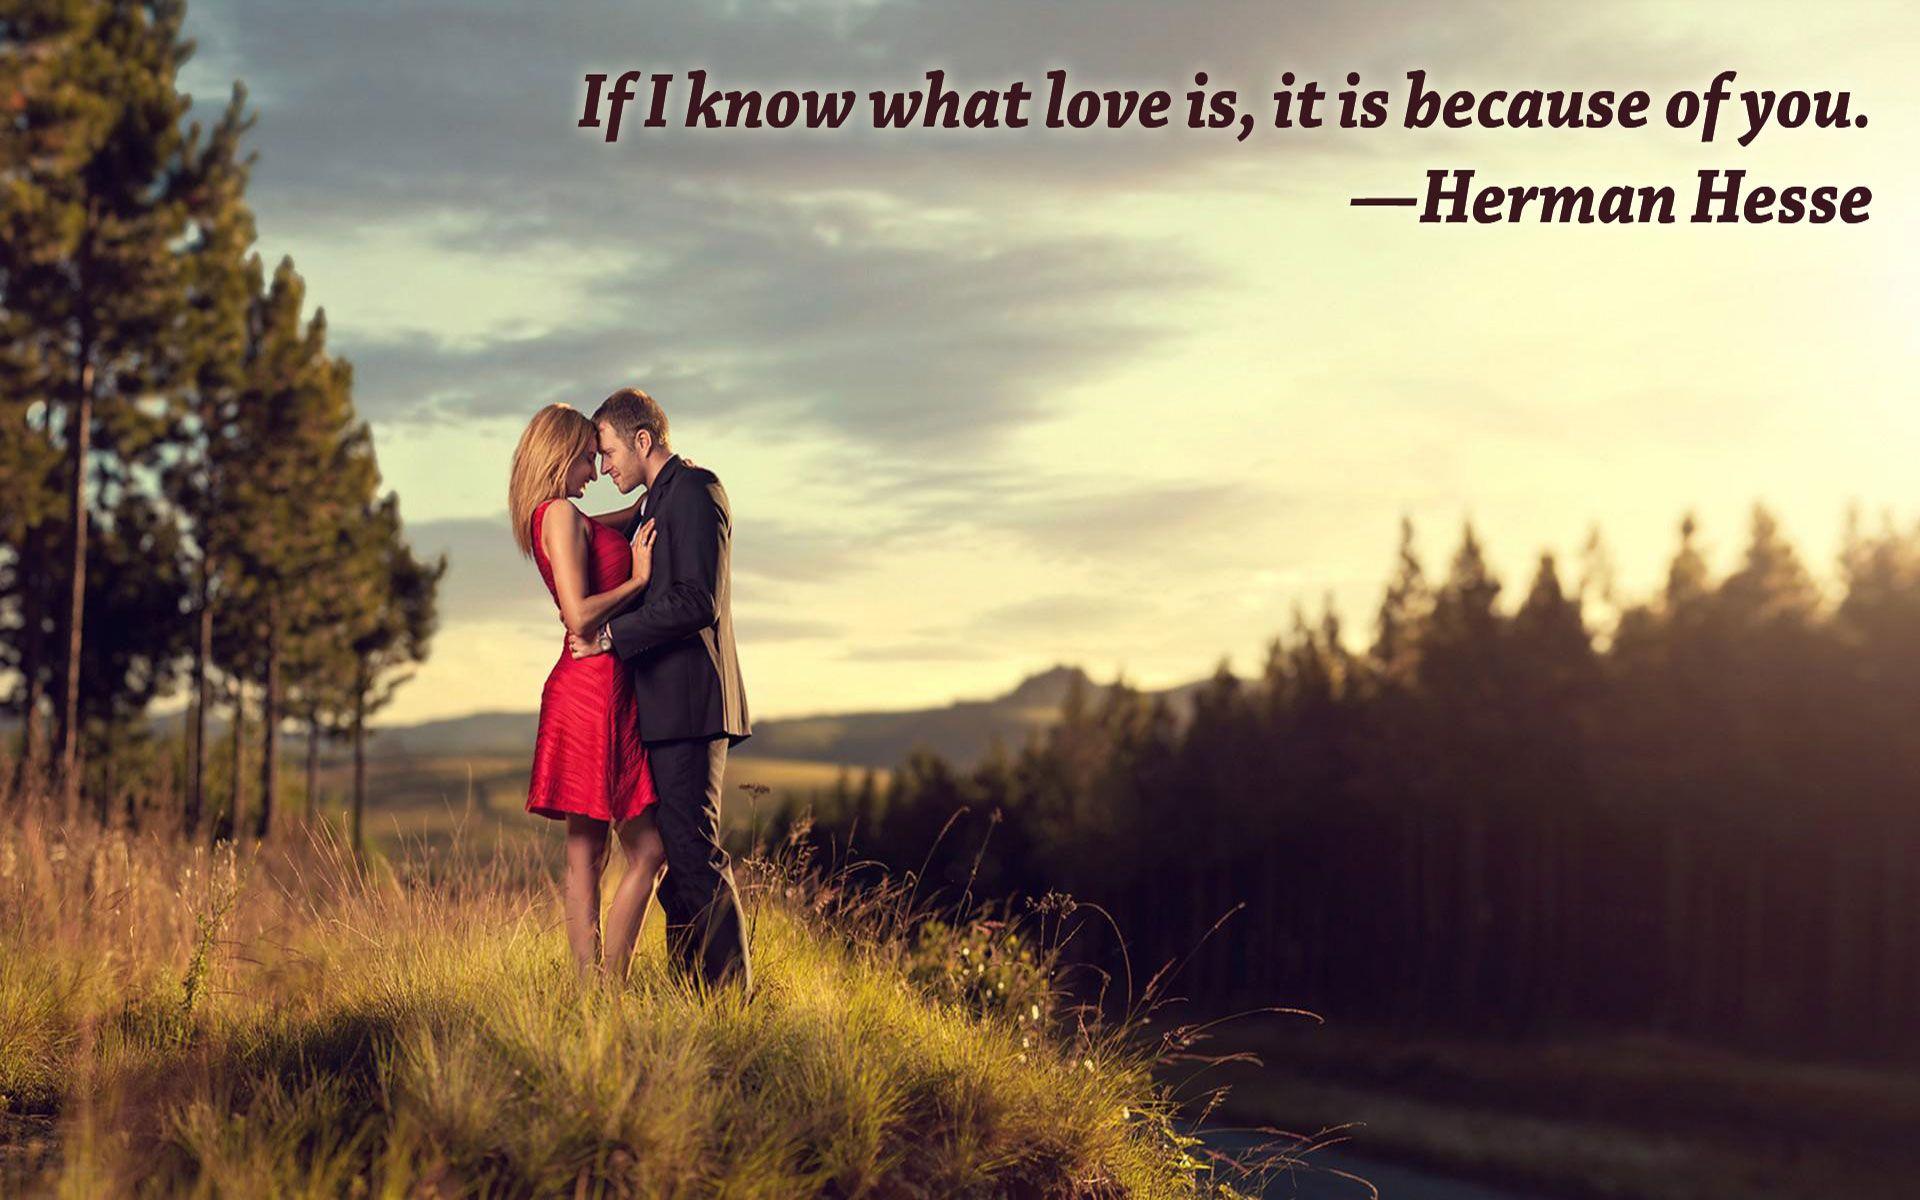 Romantic Wallpapers Of Couples With Quotes - Wallpaper Cave